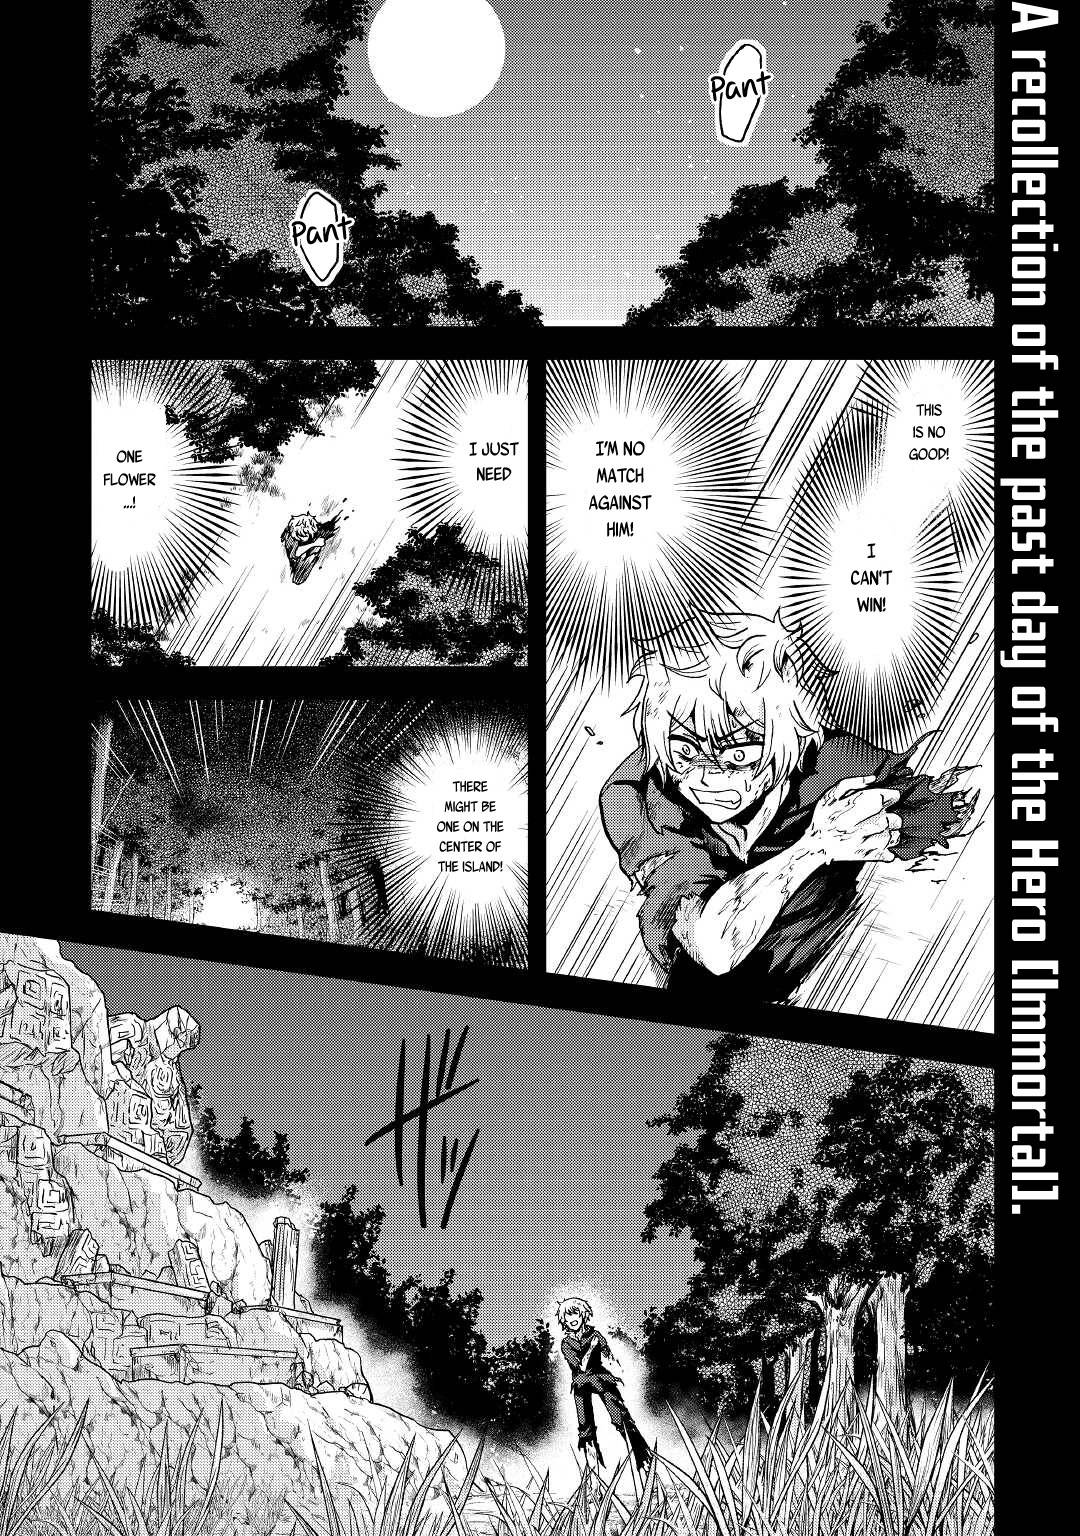 Previous Life Was Sword Emperor. This Life Is Trash Prince. - chapter 19 - #2